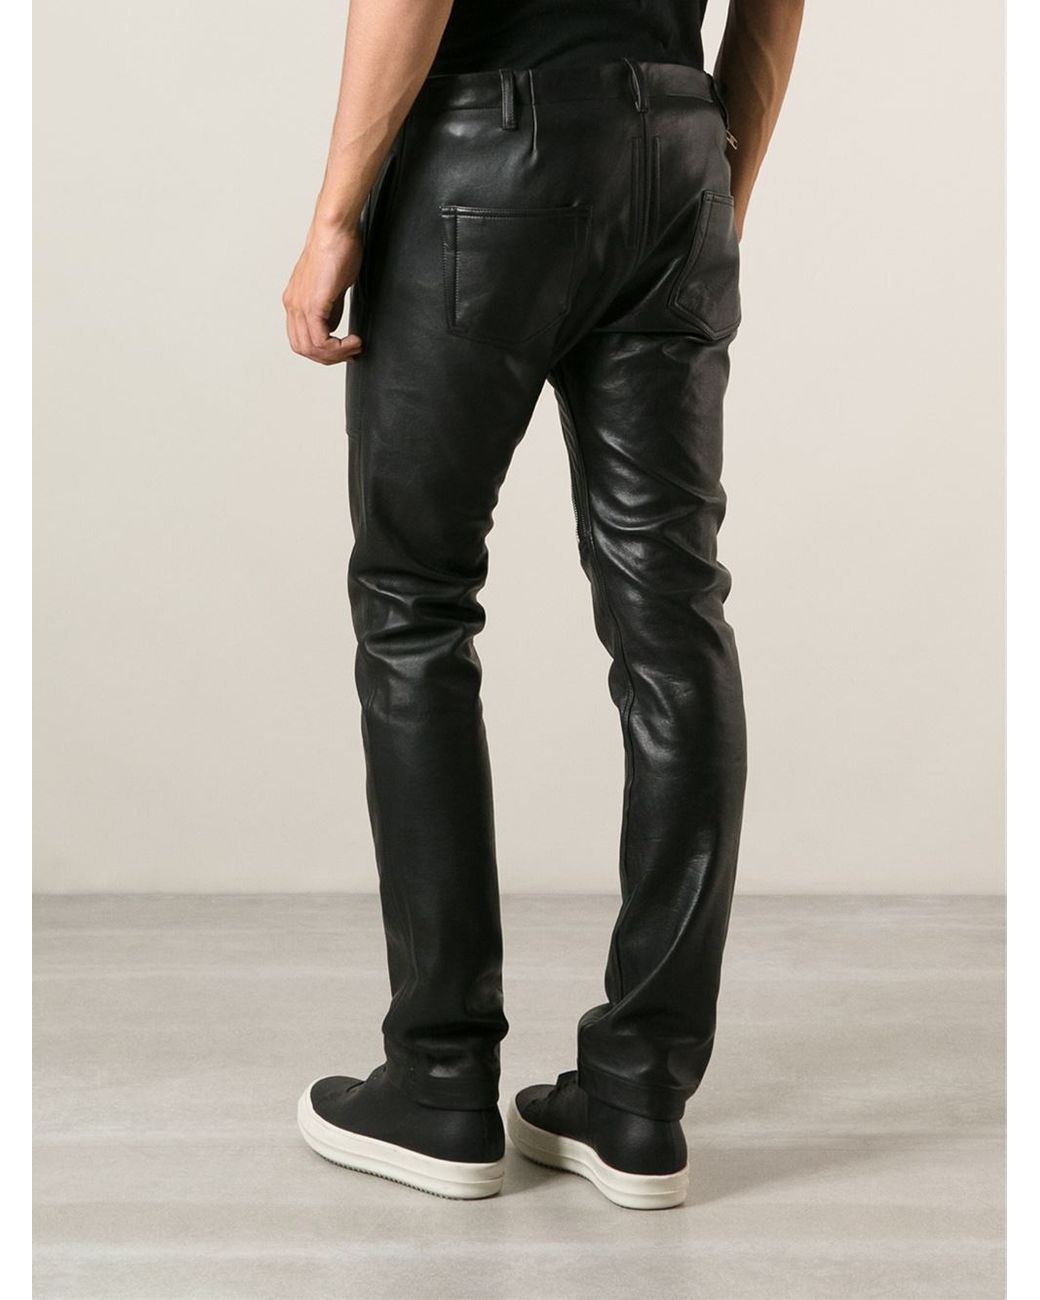 Rick Owens Slim Fit Leather Trousers in Black for Men | Lyst